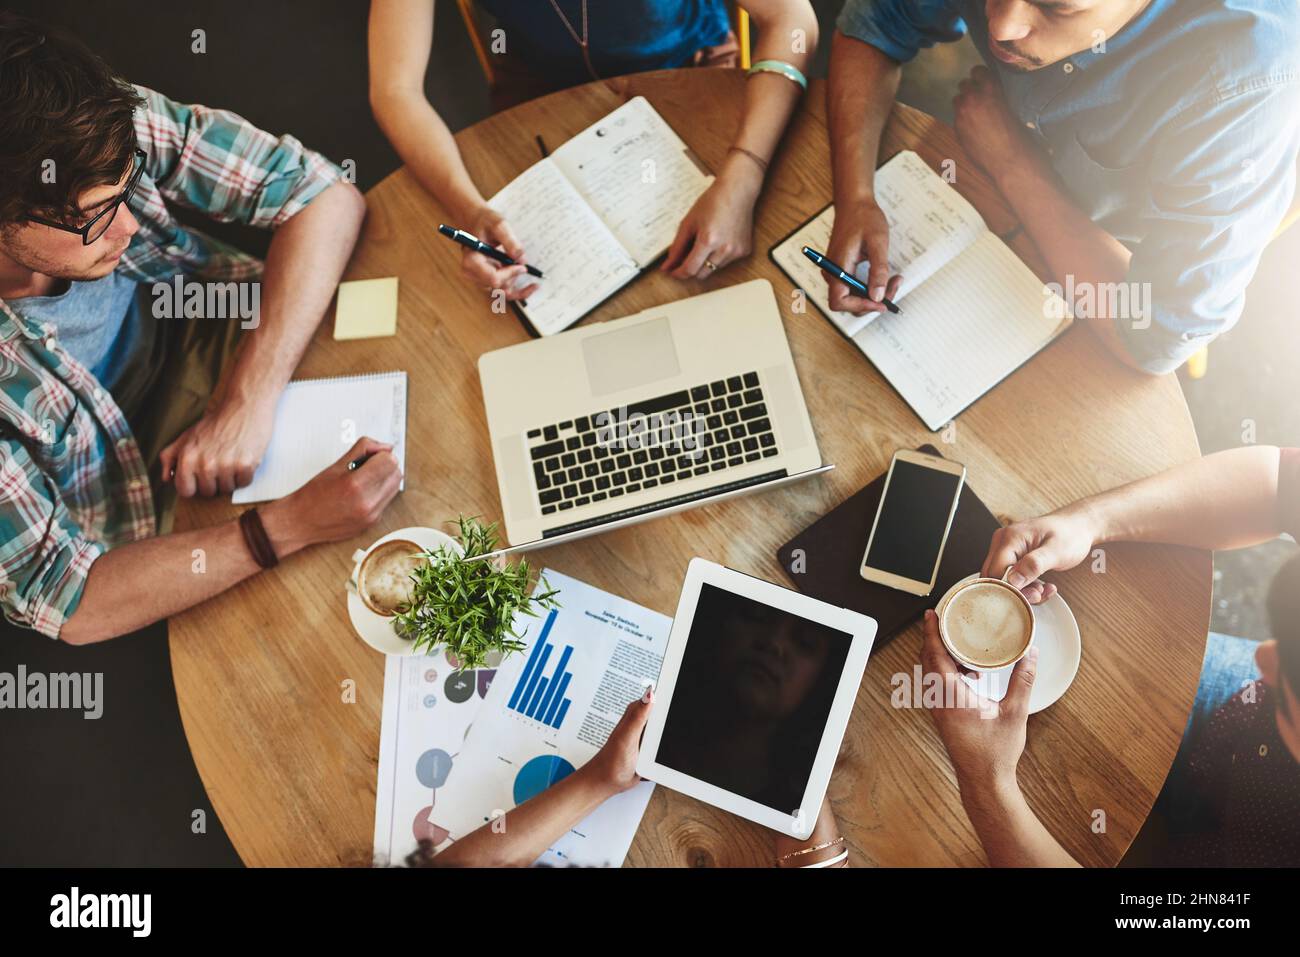 Sharing information thatll help them pass their exams. High angle shot of a group of students studying in a coffee shop. Stock Photo